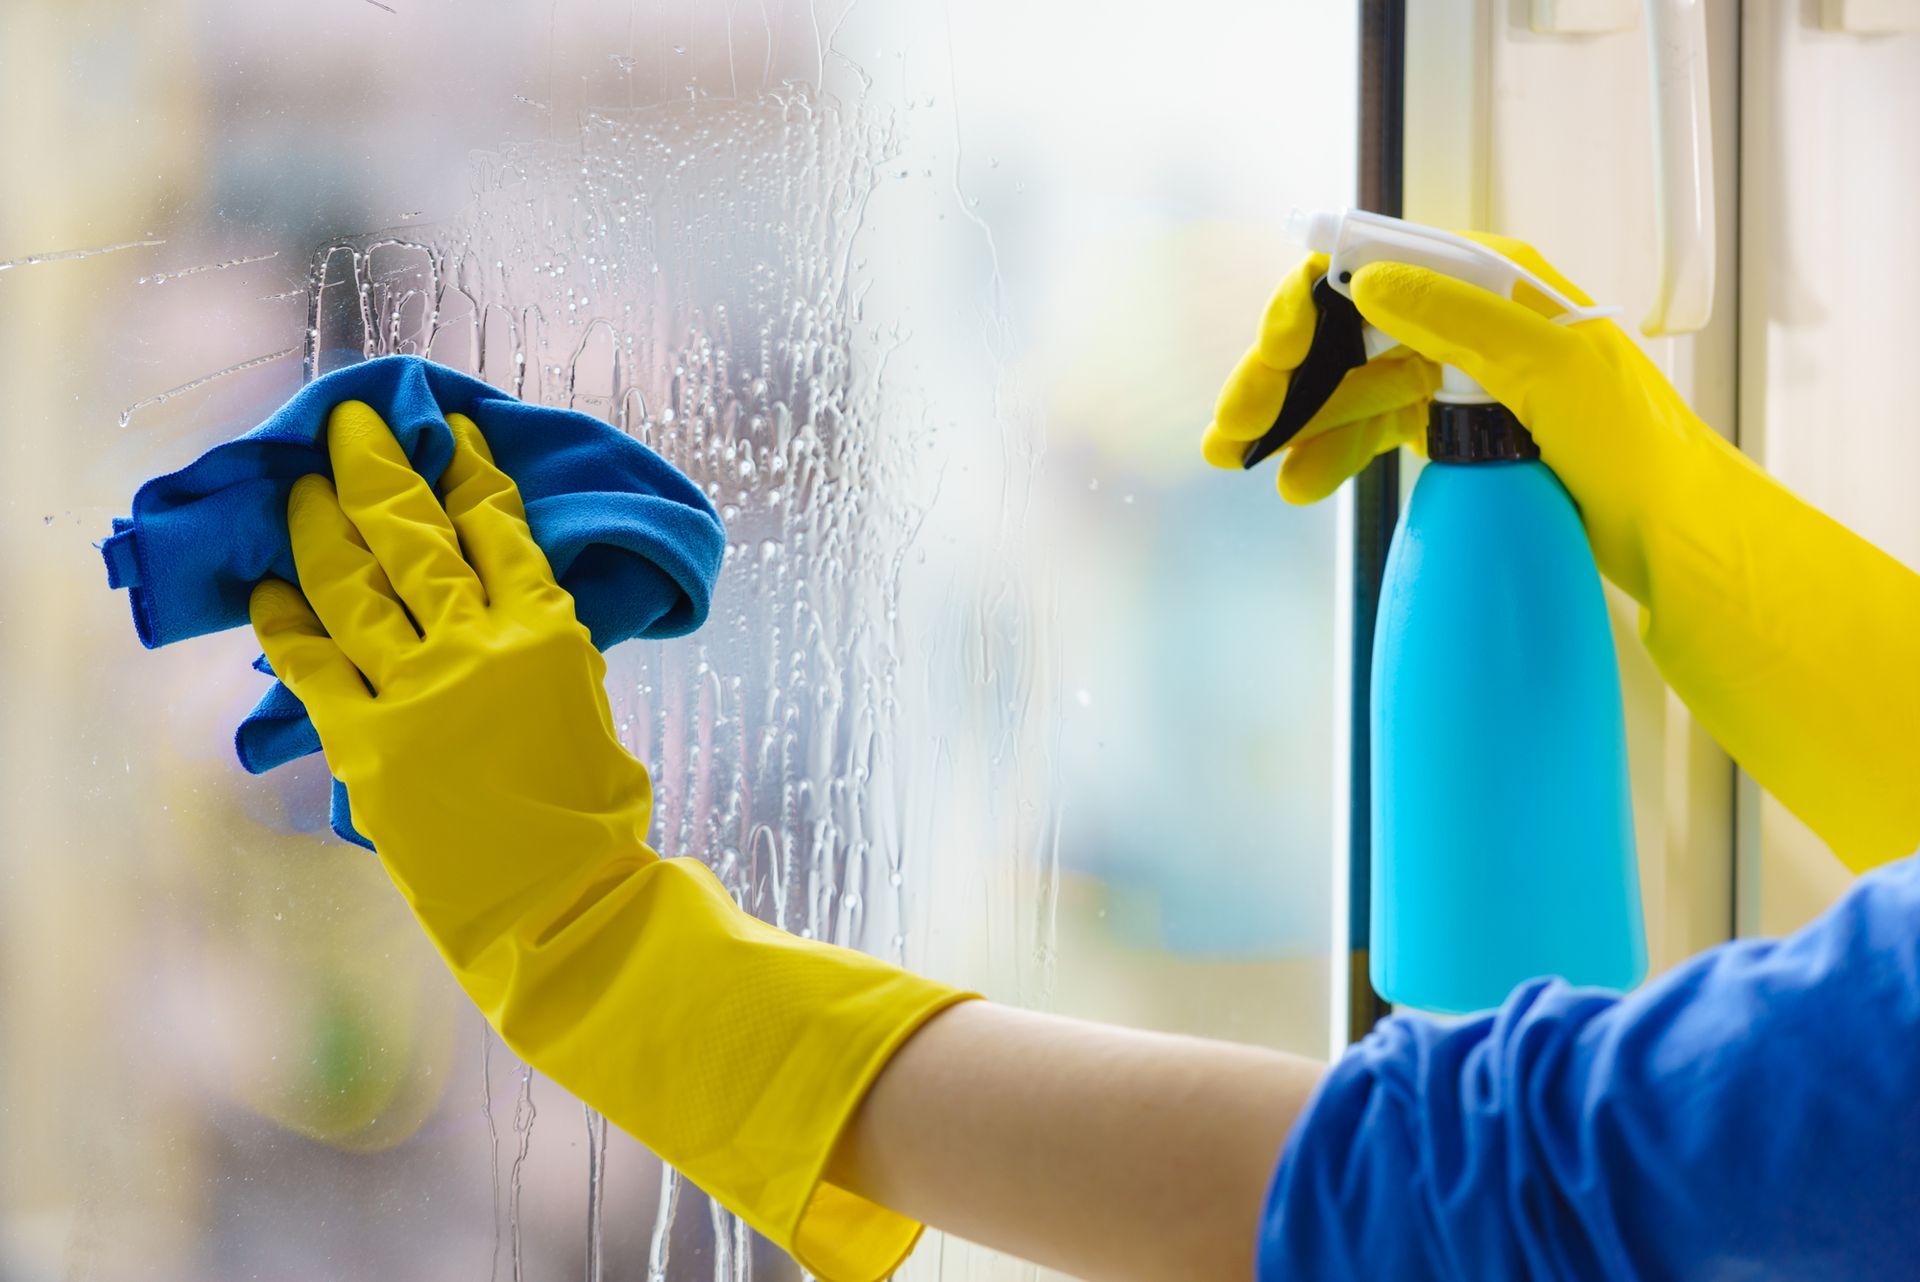 a person wearing yellow gloves is cleaning a window